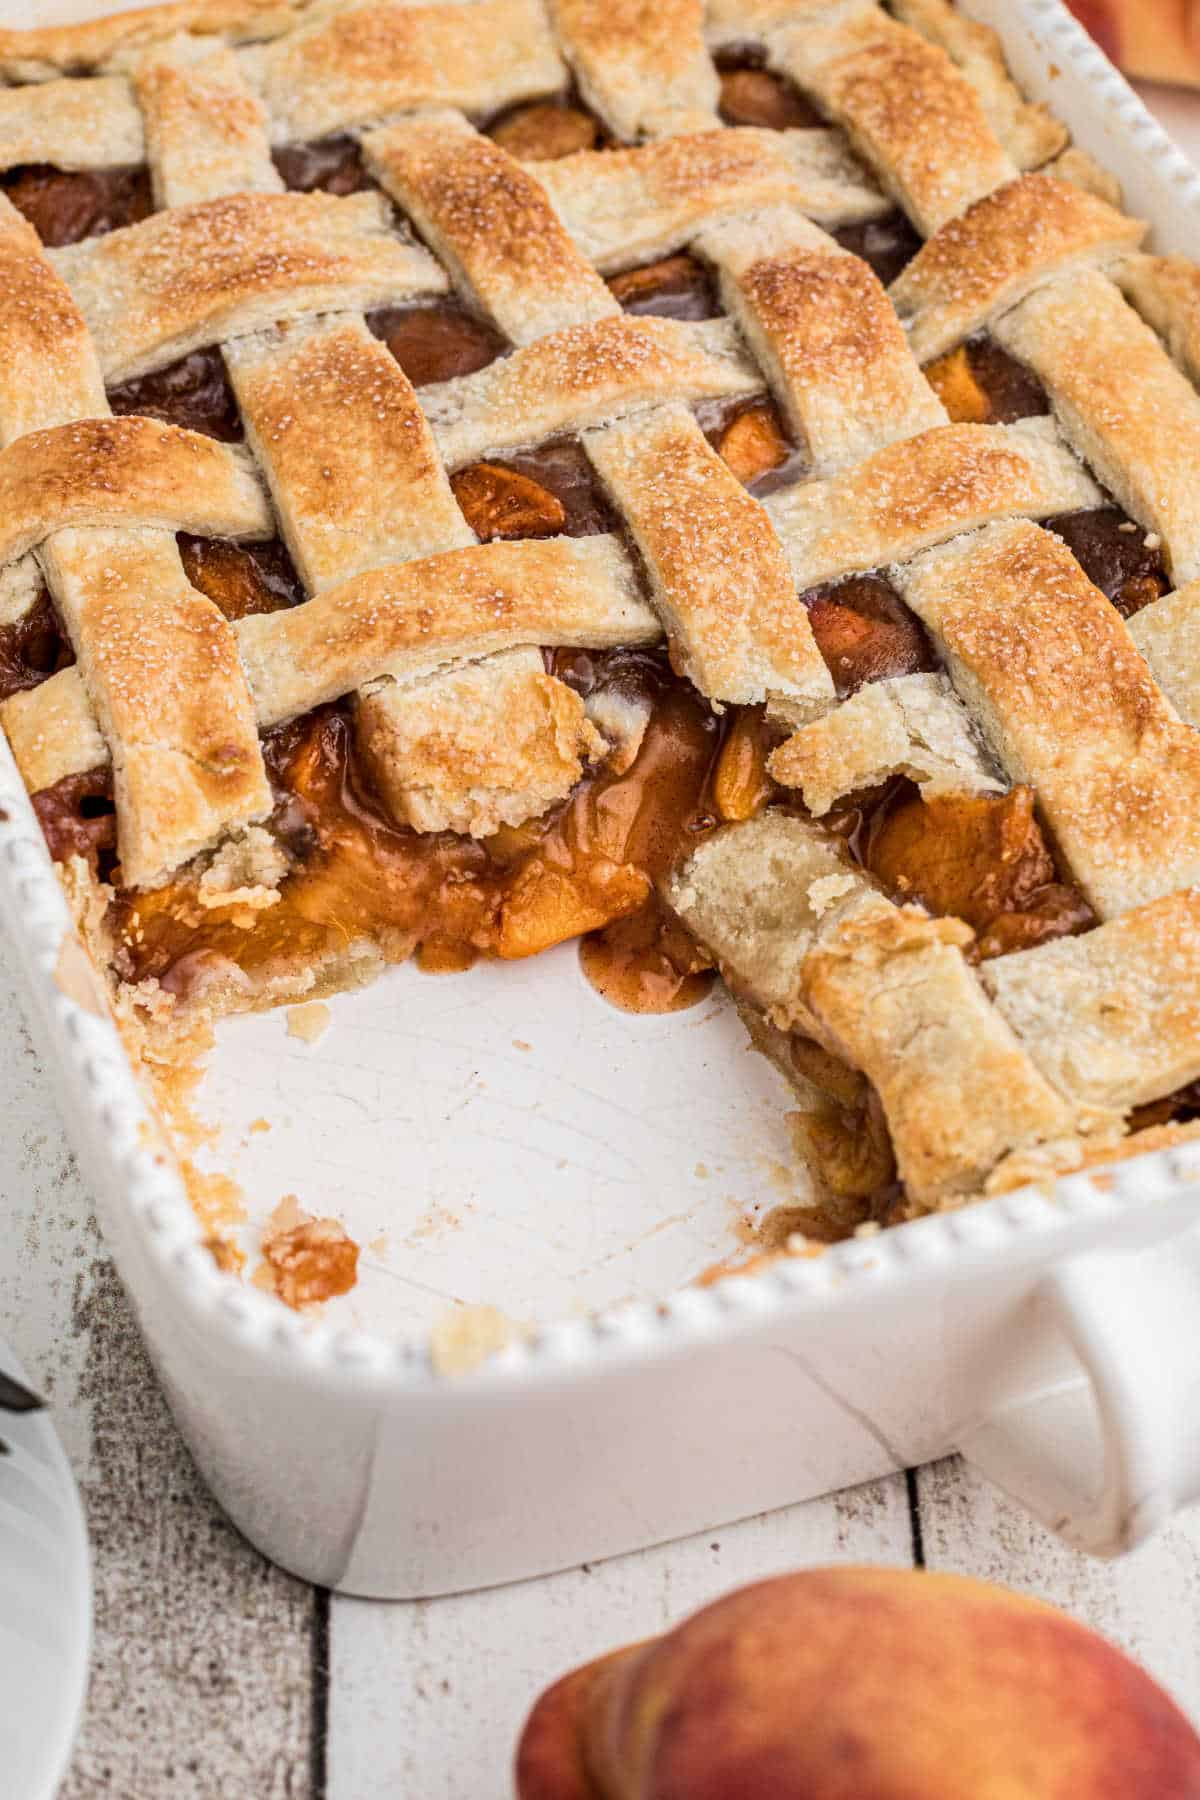 Hero image of a dish with a southern peach cobbler recipe with pie crust, and a scoop missing.